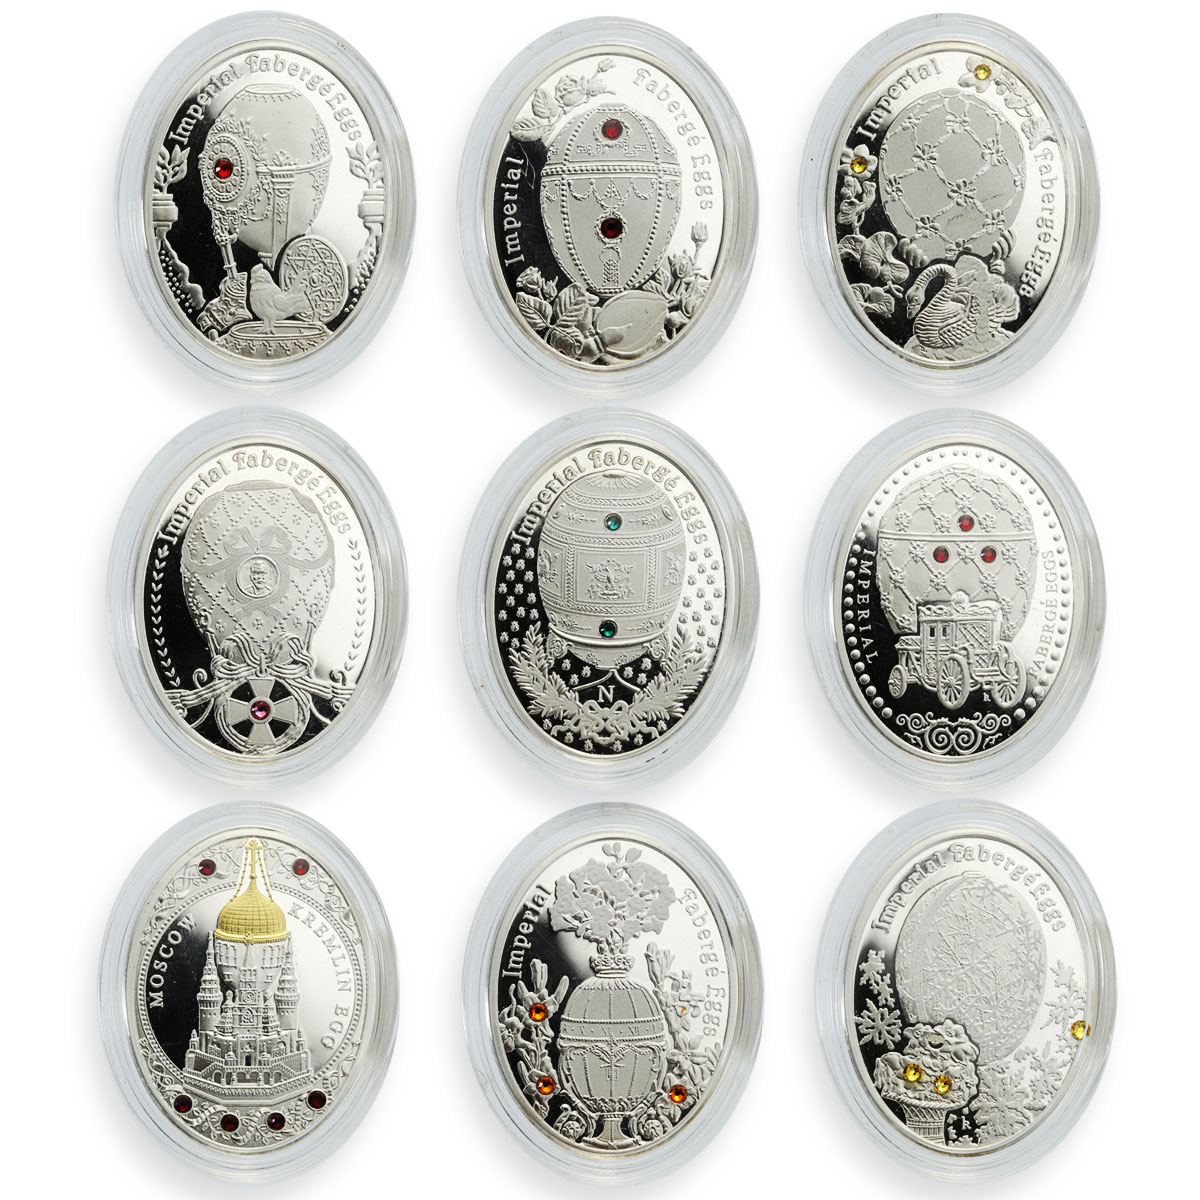 Niue set 9 coins Imperial Faberge Eggs crystals proof silver 2012/2013